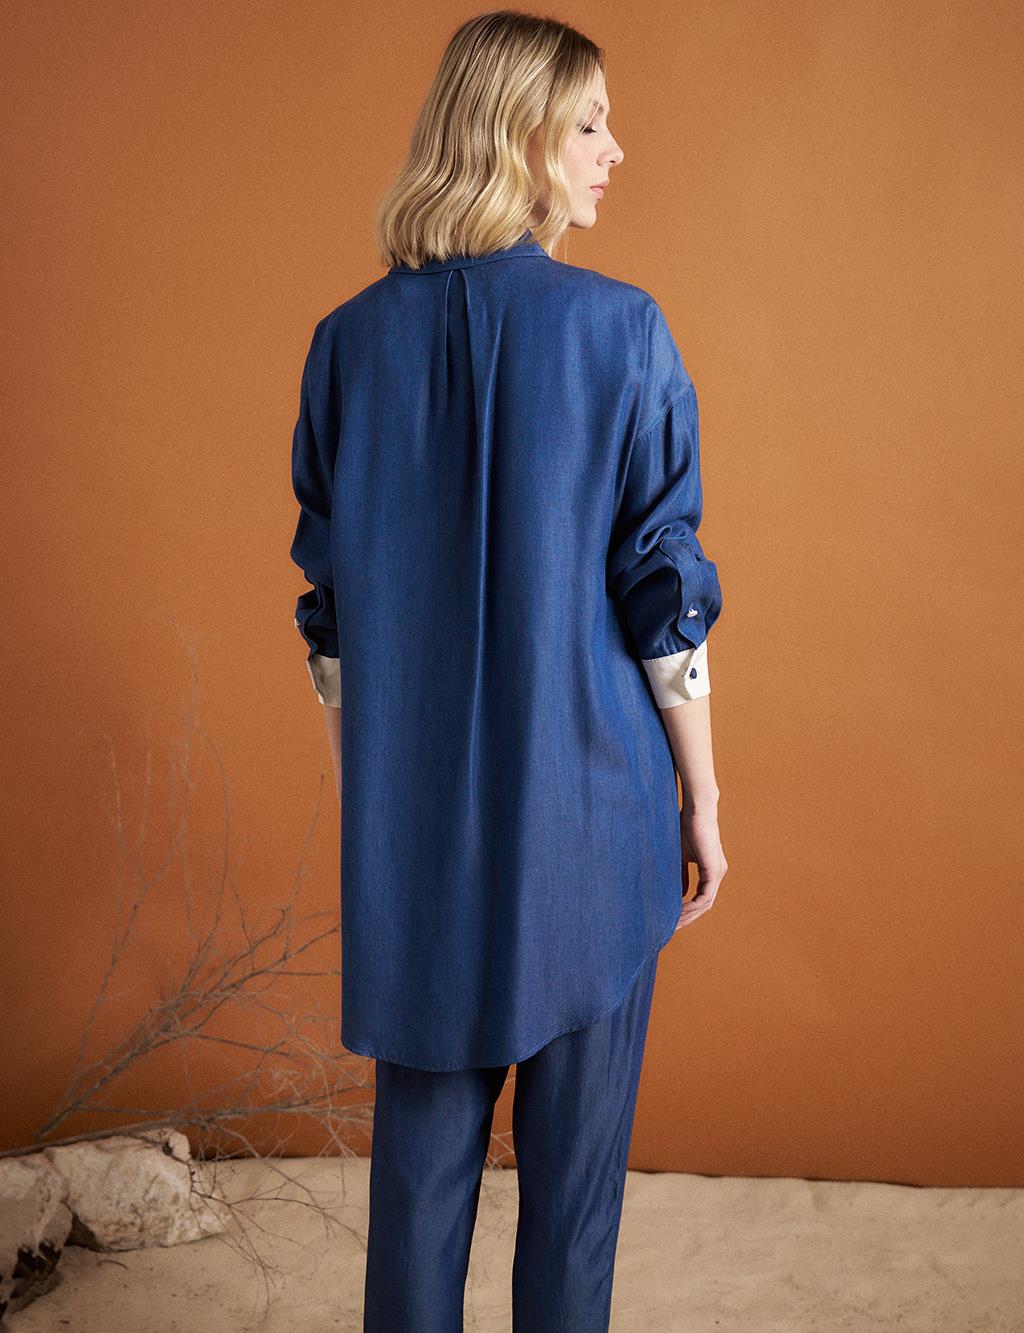 The Line Pattern Mixed Tunic Navy Blue